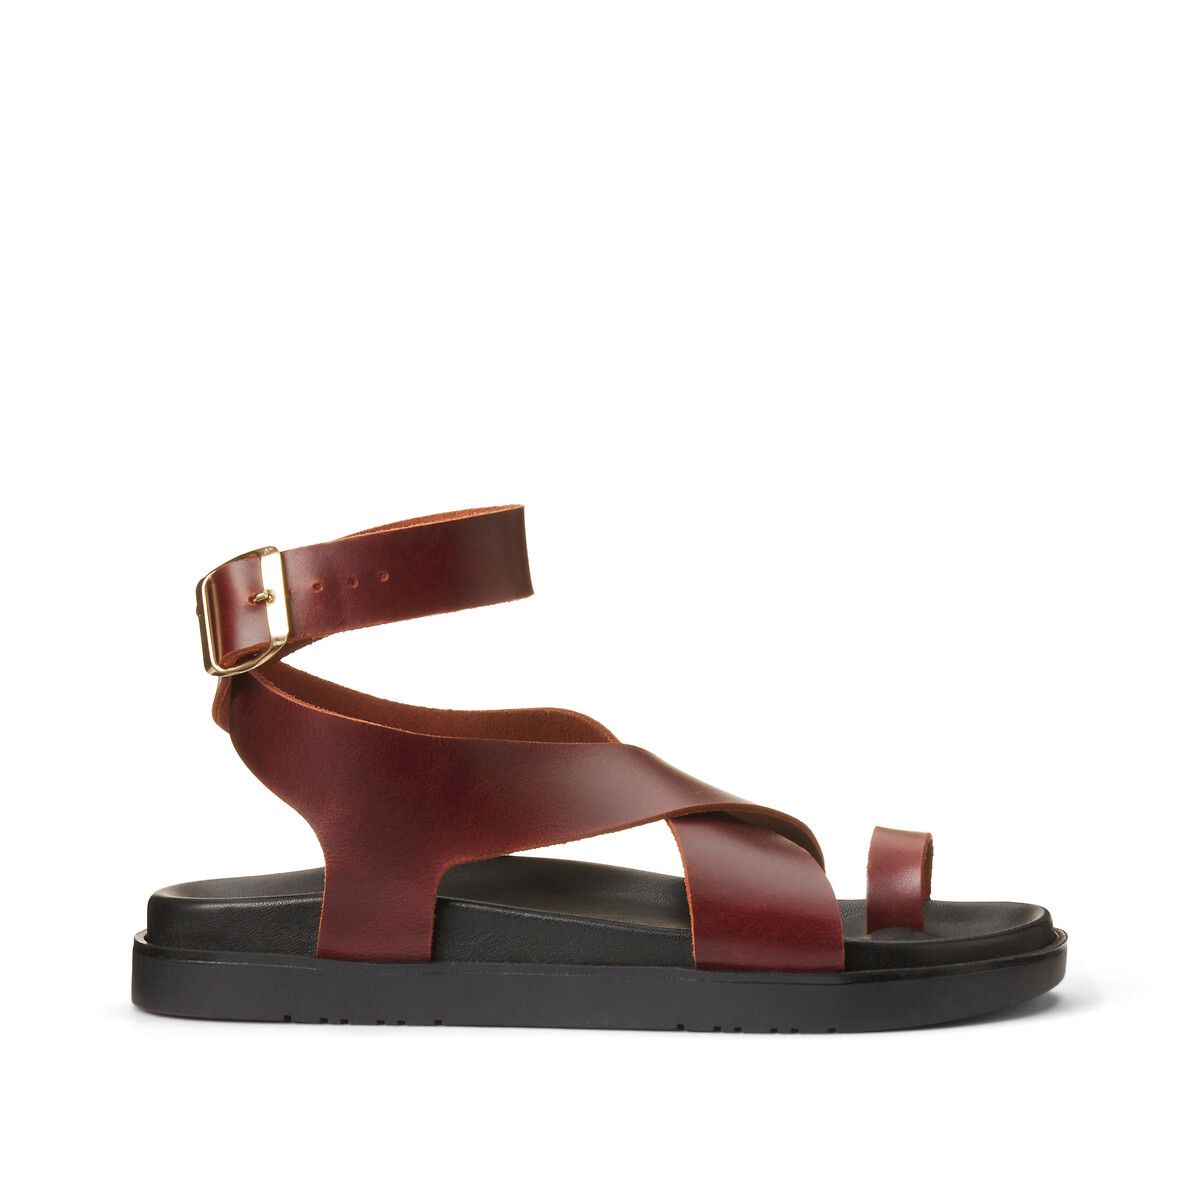 Leather Toe Post Sandals with Ankle Strap | La Redoute (UK)